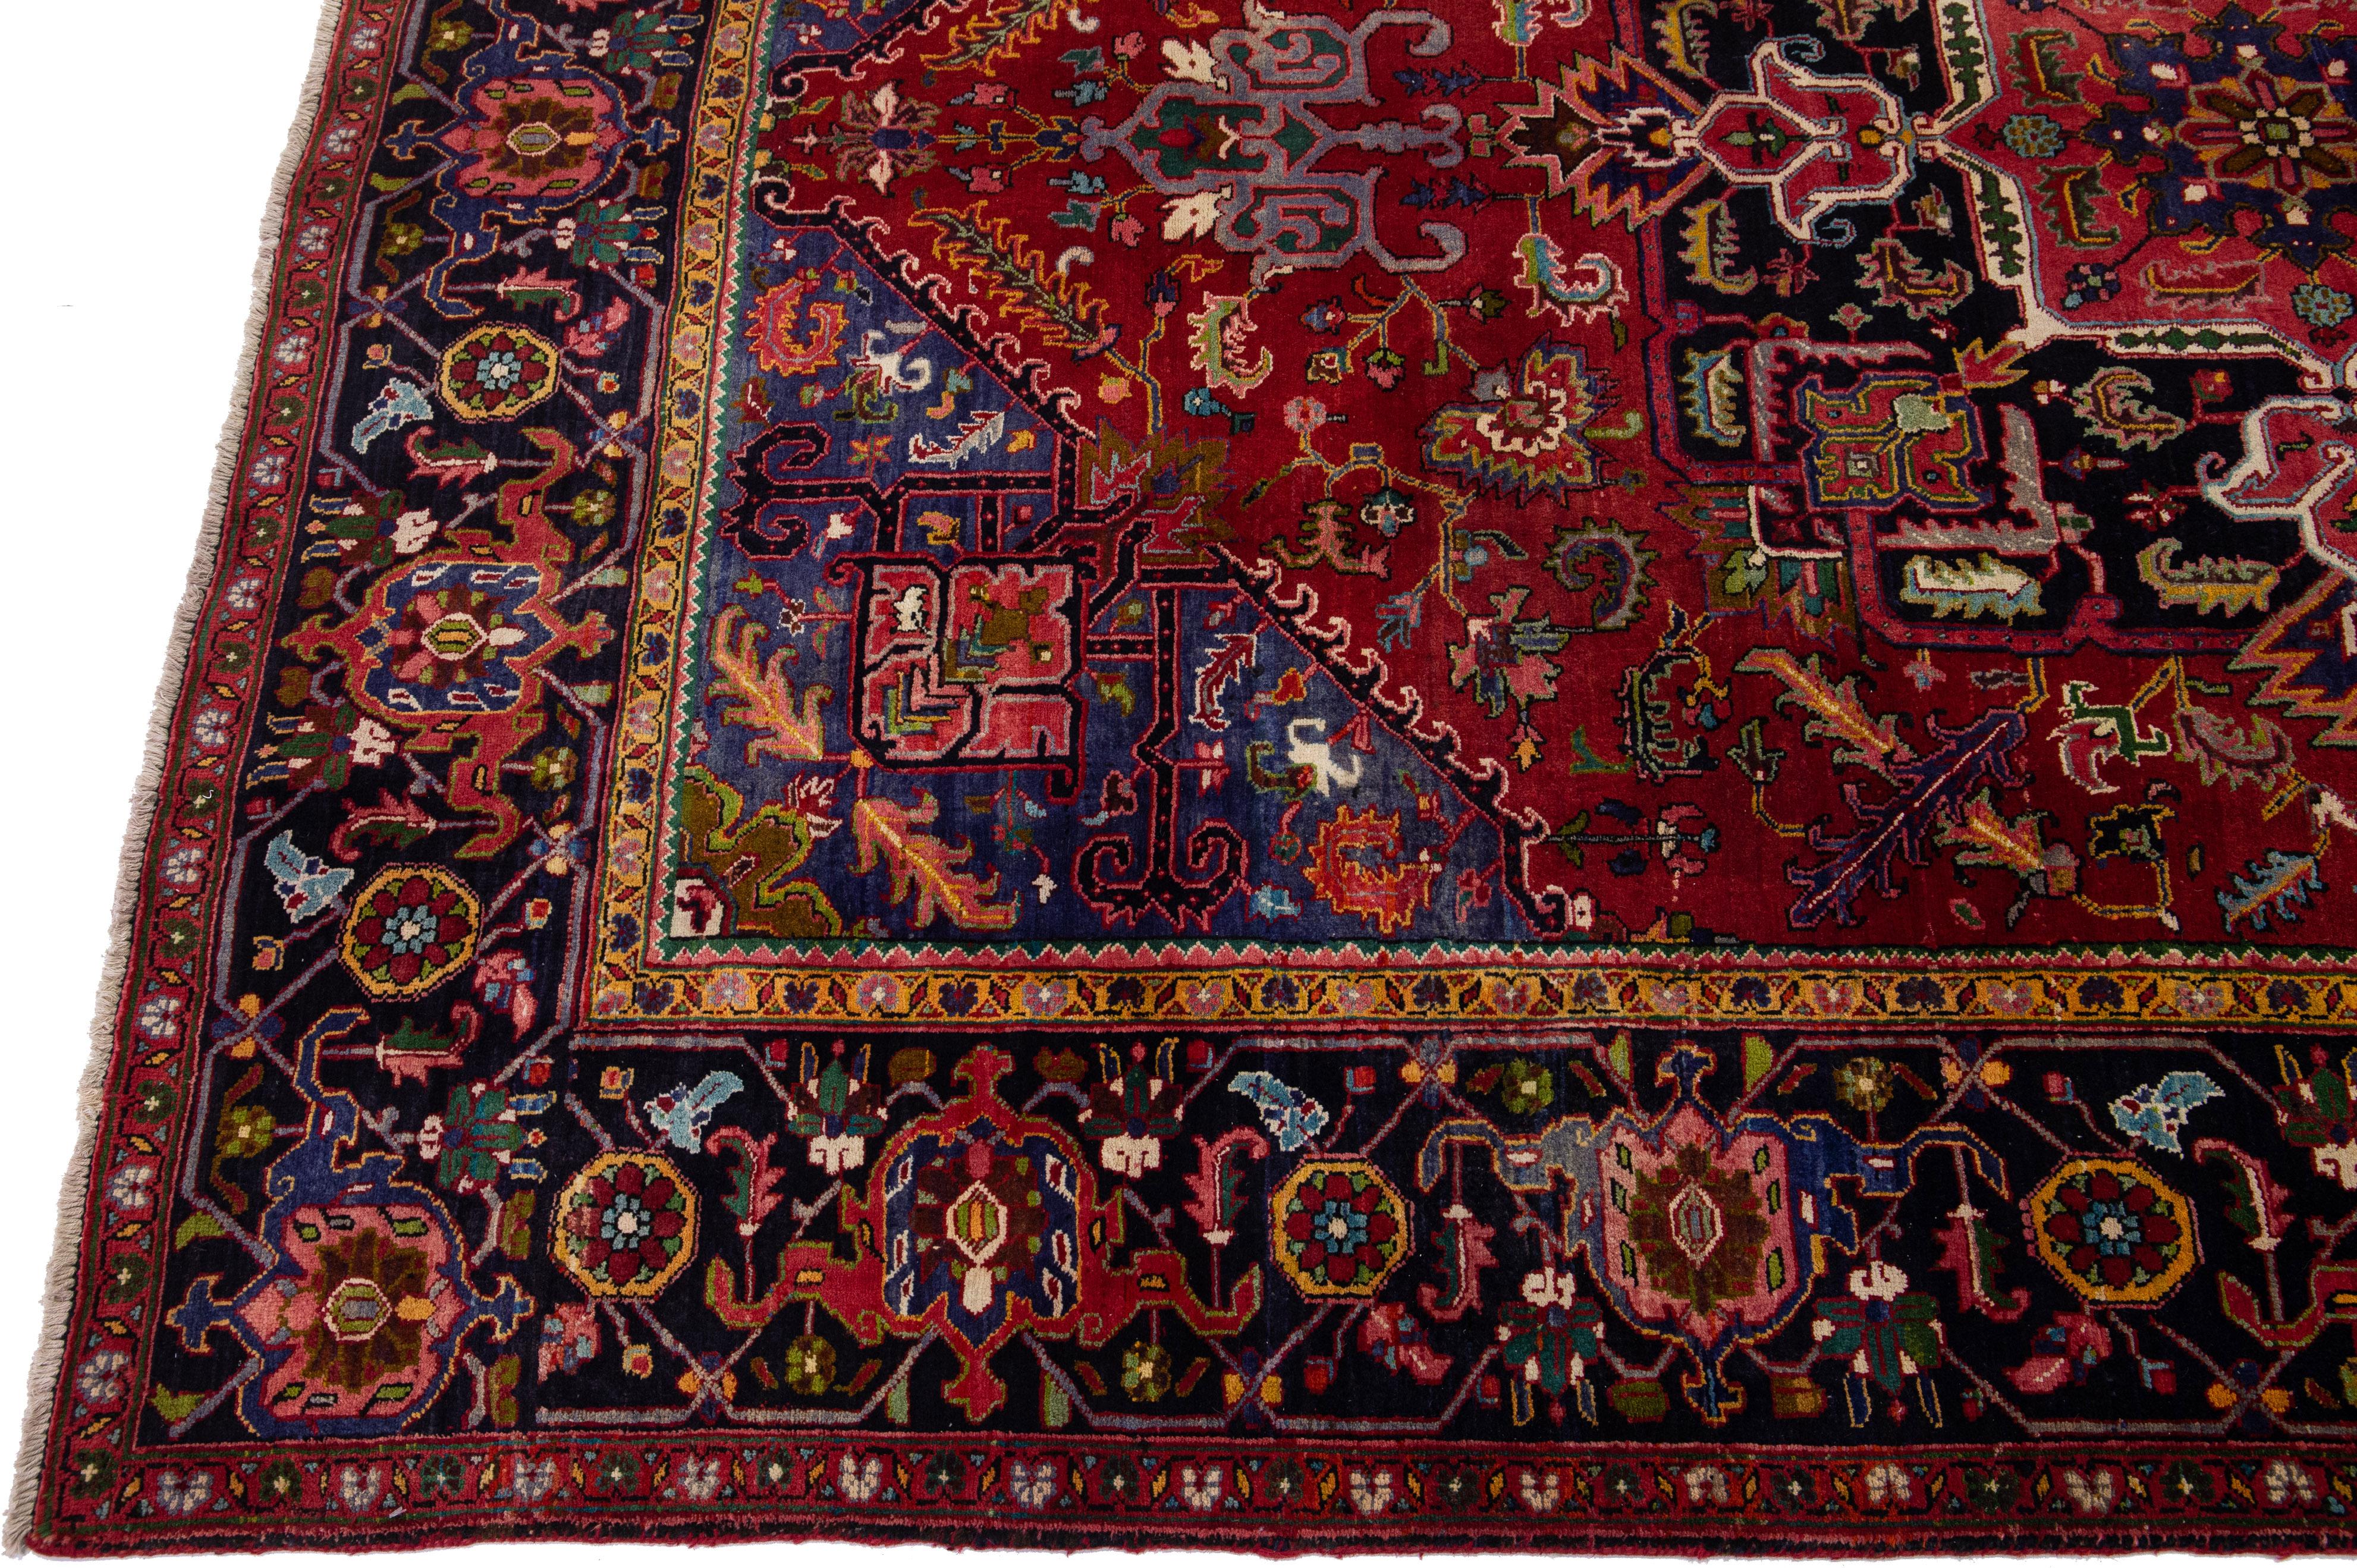 Beautiful antique Heriz hand-knotted wool rug with a red color field. This Persian rug has multicolor accents in a gorgeous all-over floral pattern.

This rug measures: 8'2